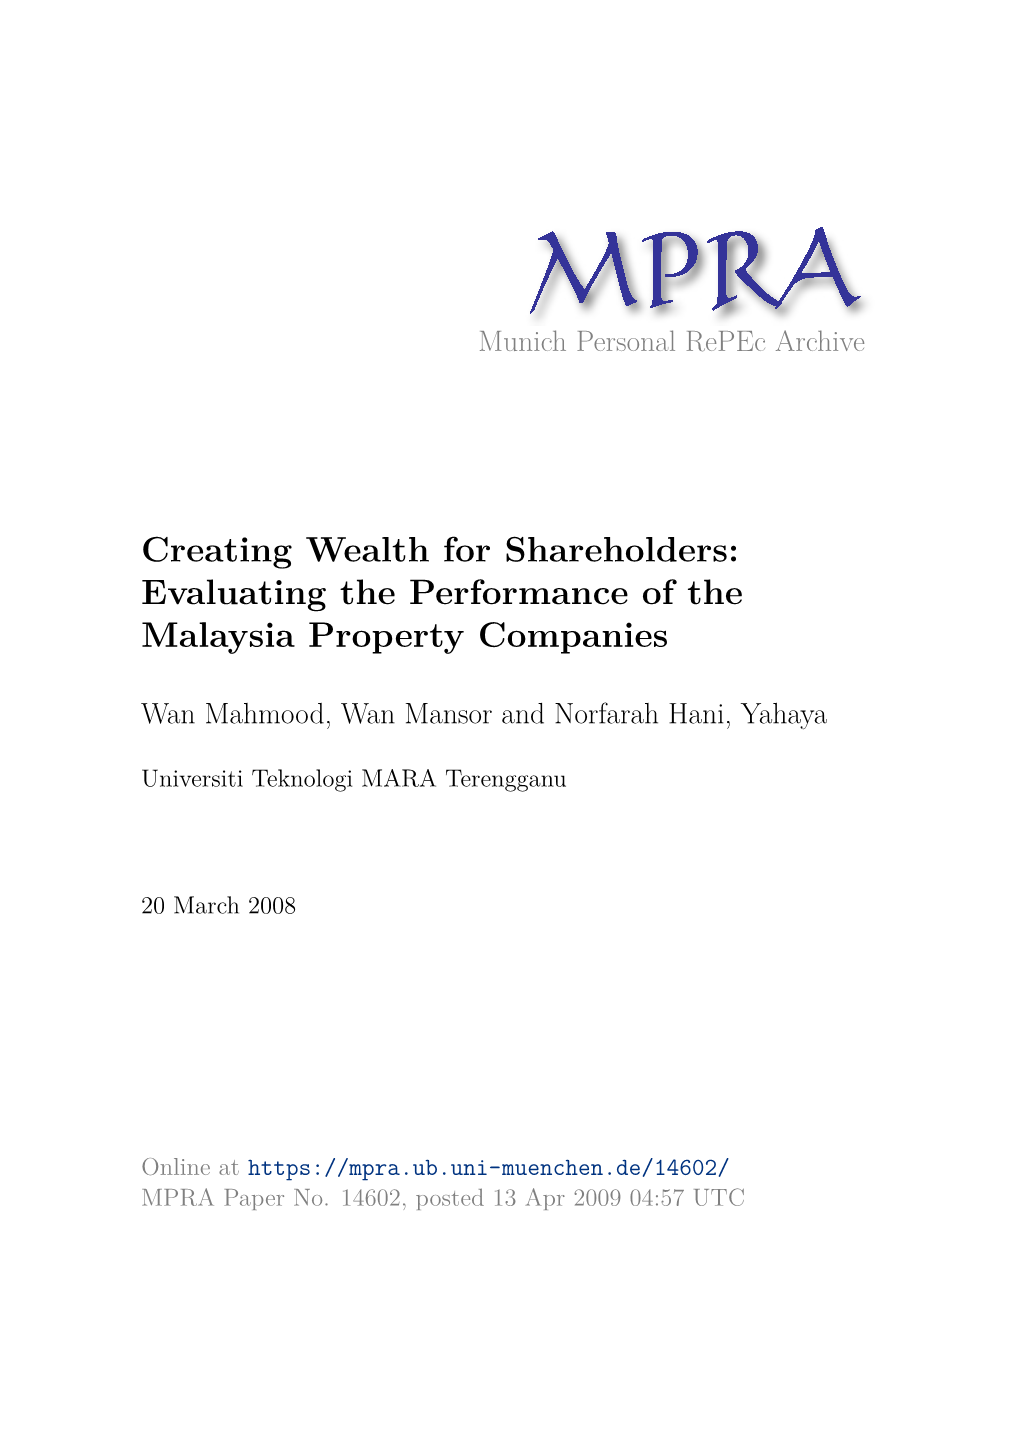 Creating Wealth for Shareholders: Evaluating the Performance of the Malaysia Property Companies